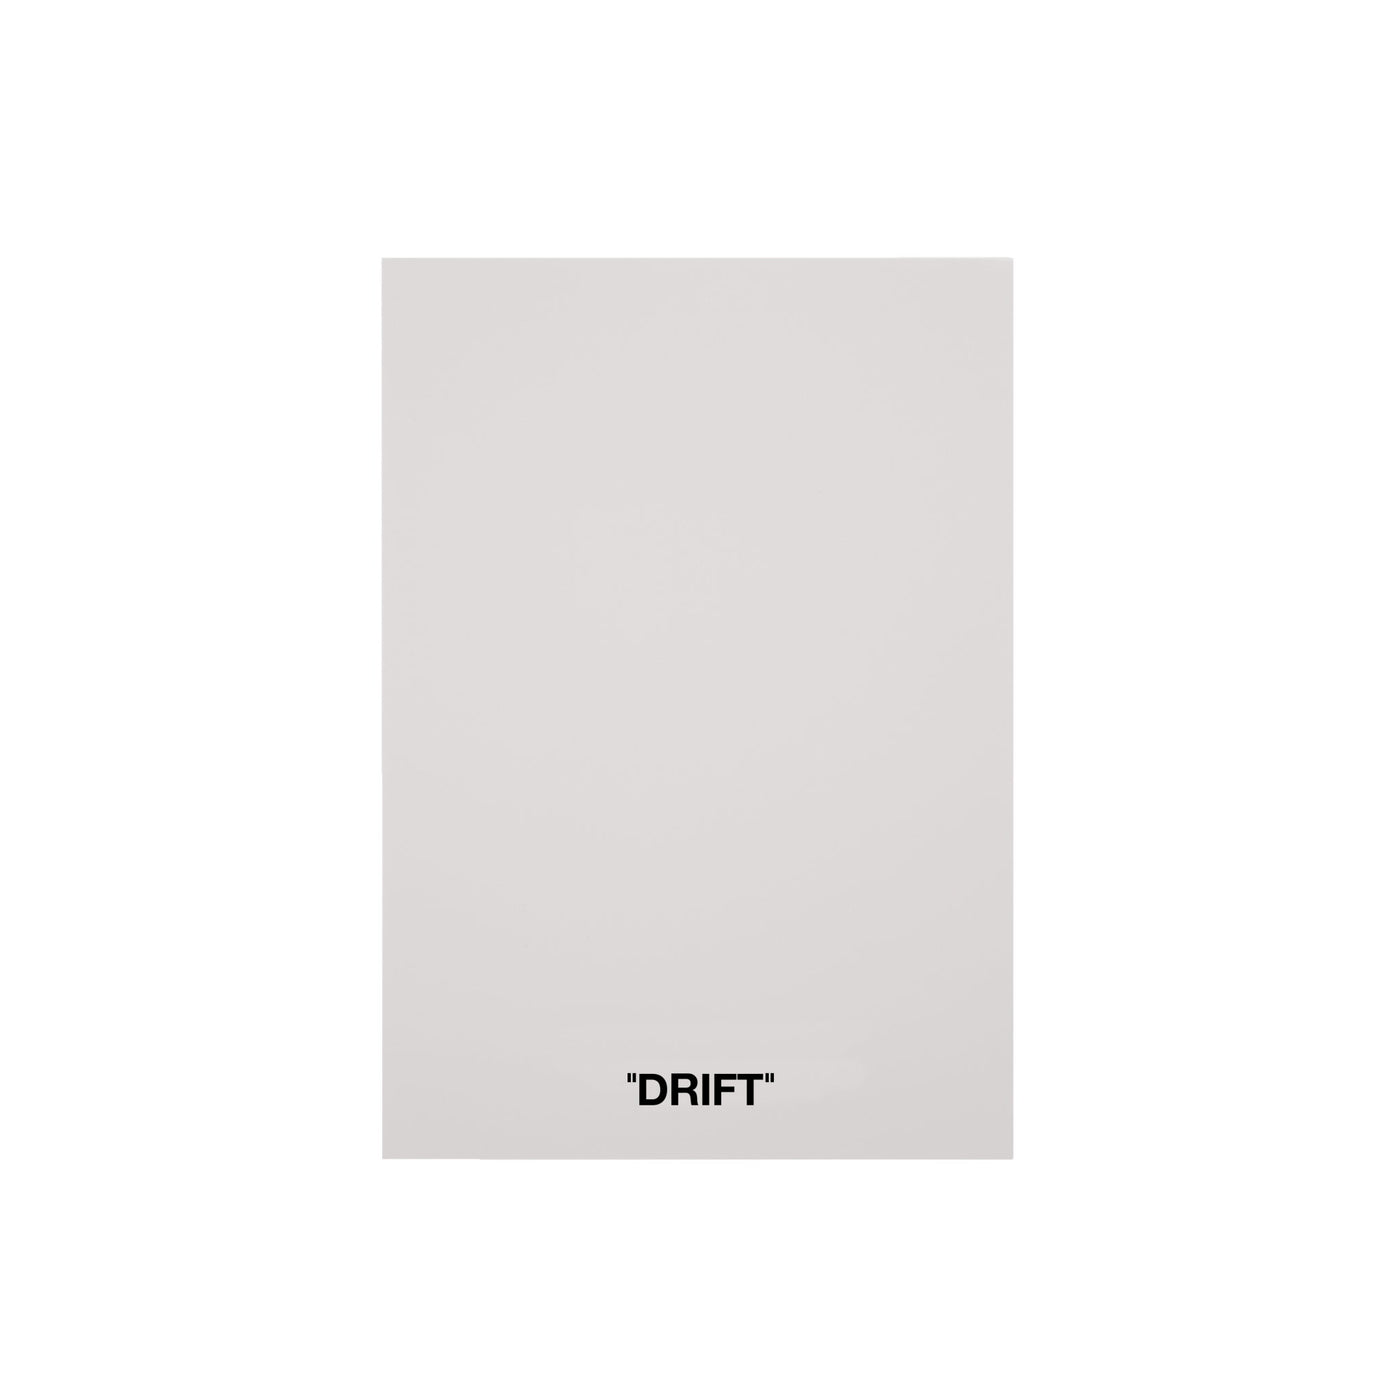 Color Card - Drift - SHADES by Eric Kuster